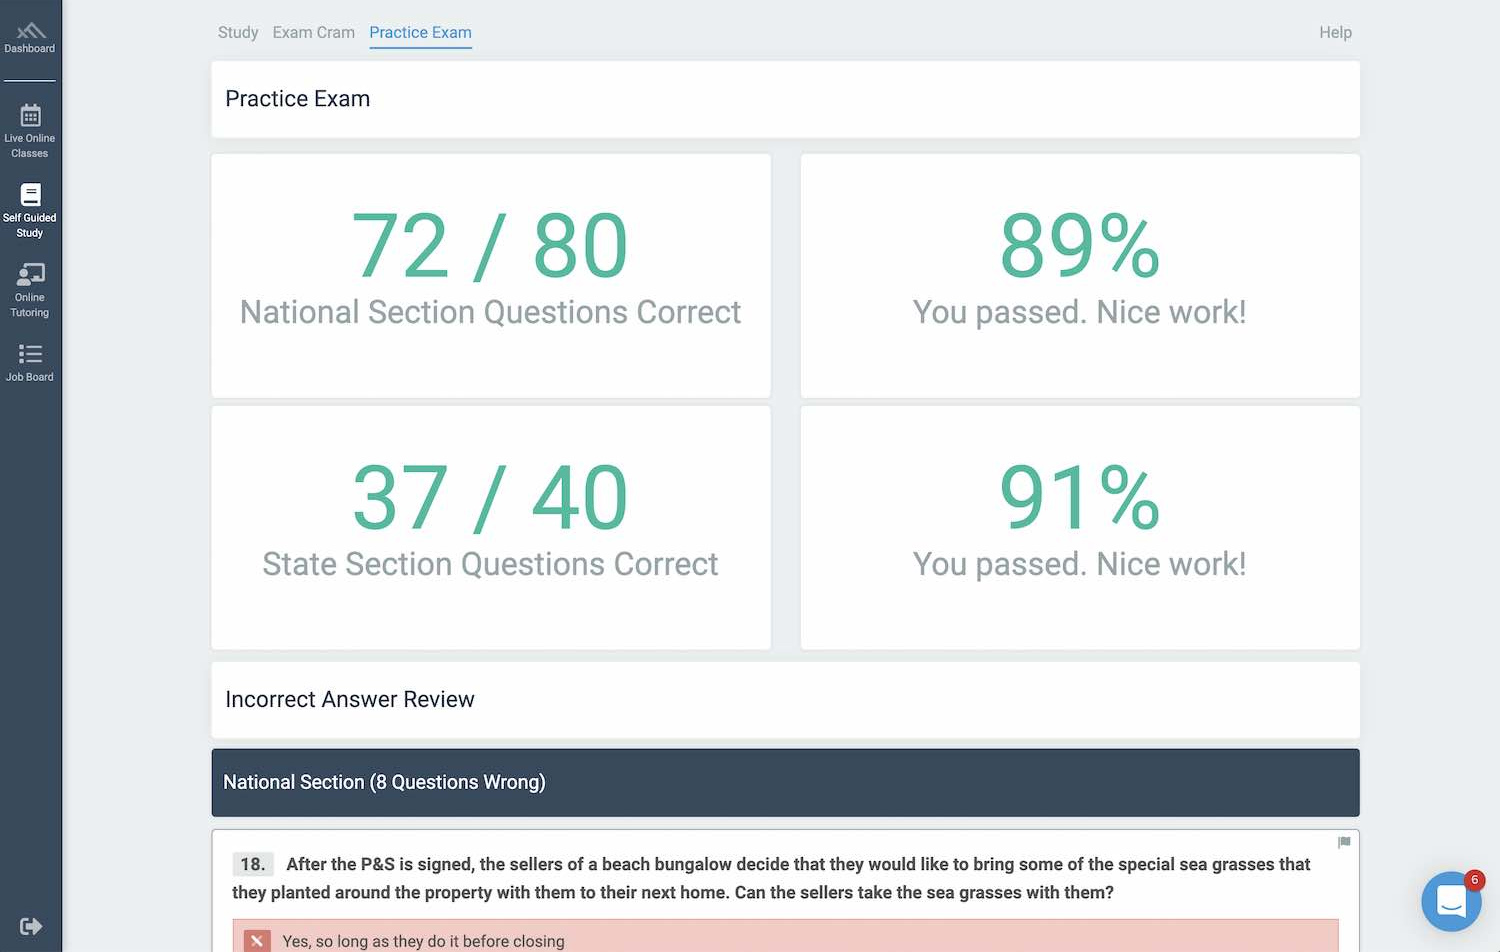 Instant practice exam results from Freedom Trail Realty School.